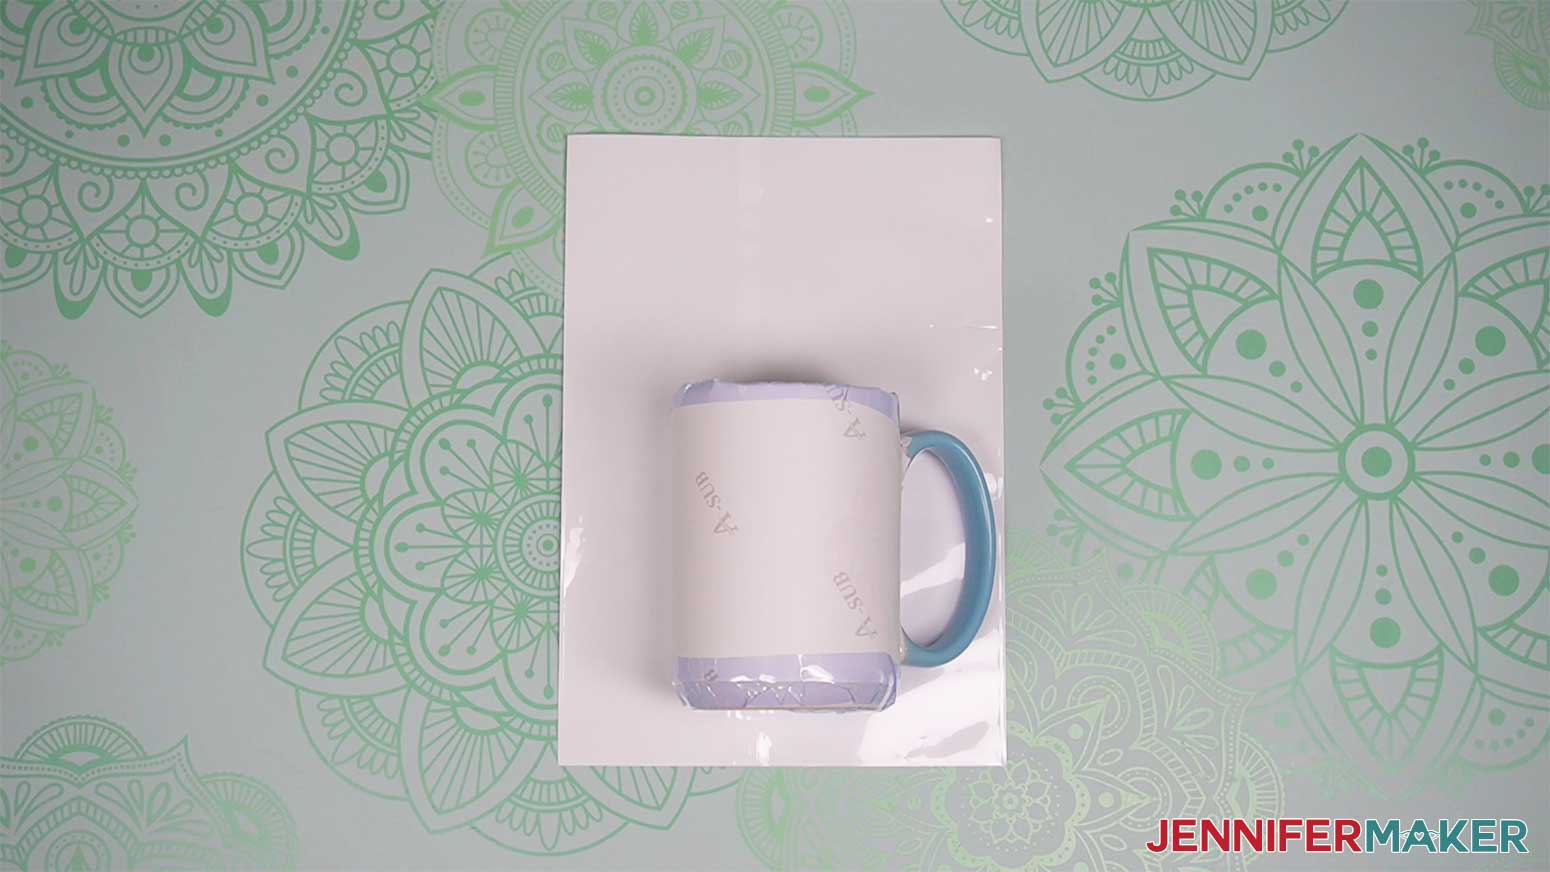 How To Use Sublimate Coffee Mugs With Shrink Wraps 